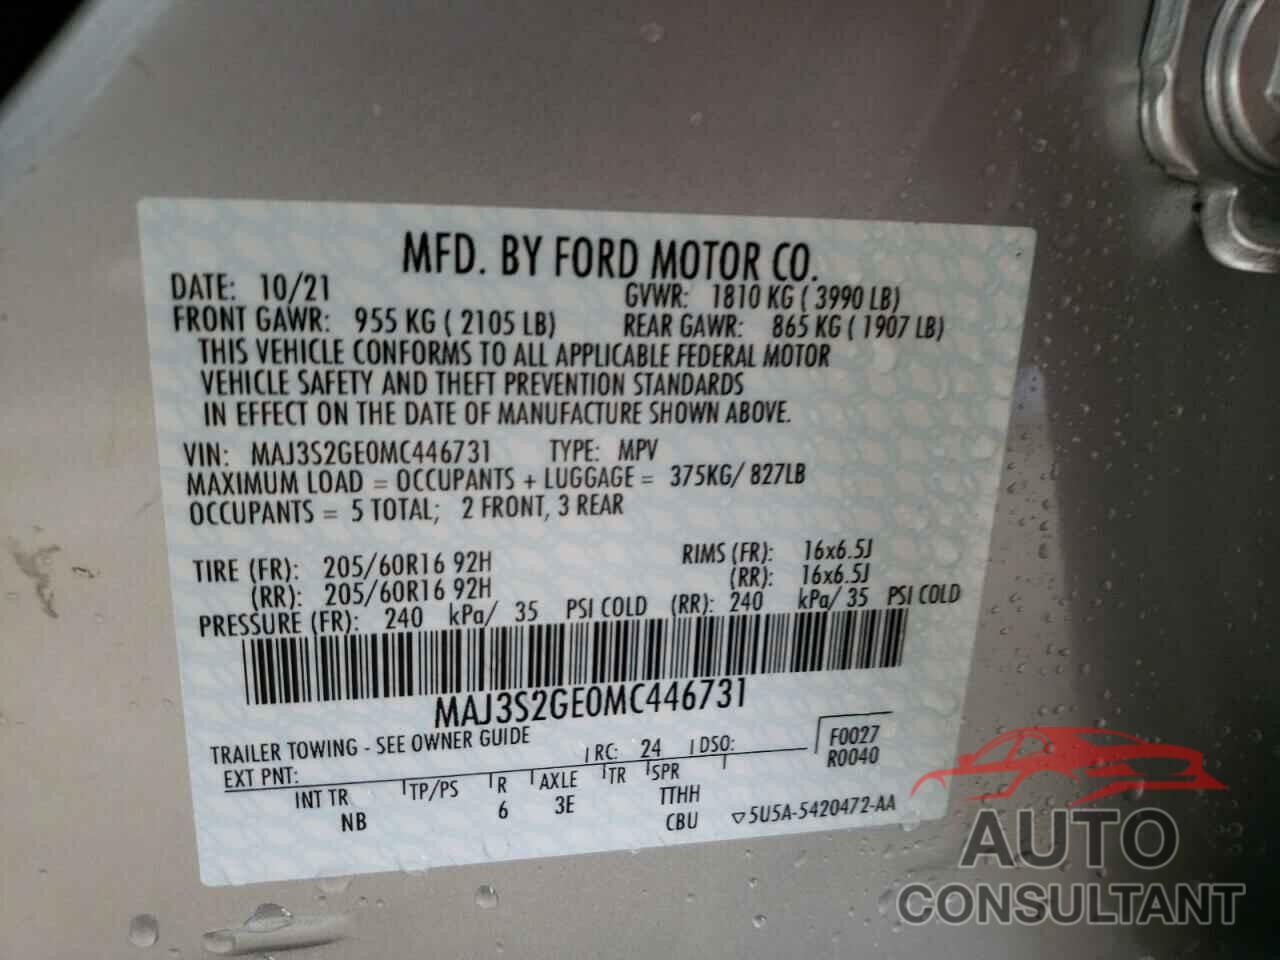 FORD ALL OTHER 2021 - MAJ3S2GE0MC446731